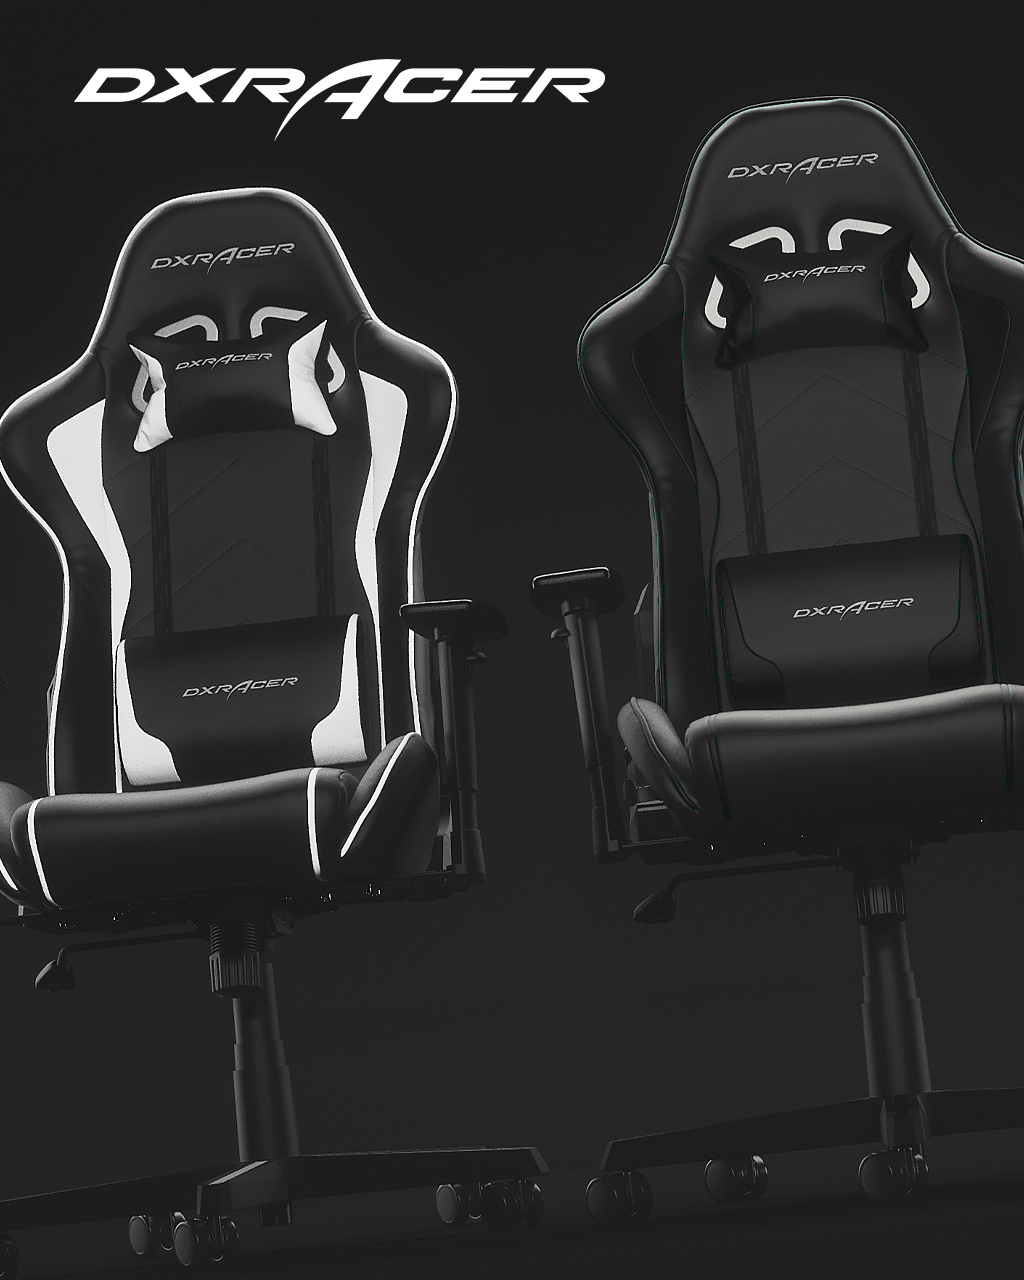 Sale on DXRacer Gaming Chairs